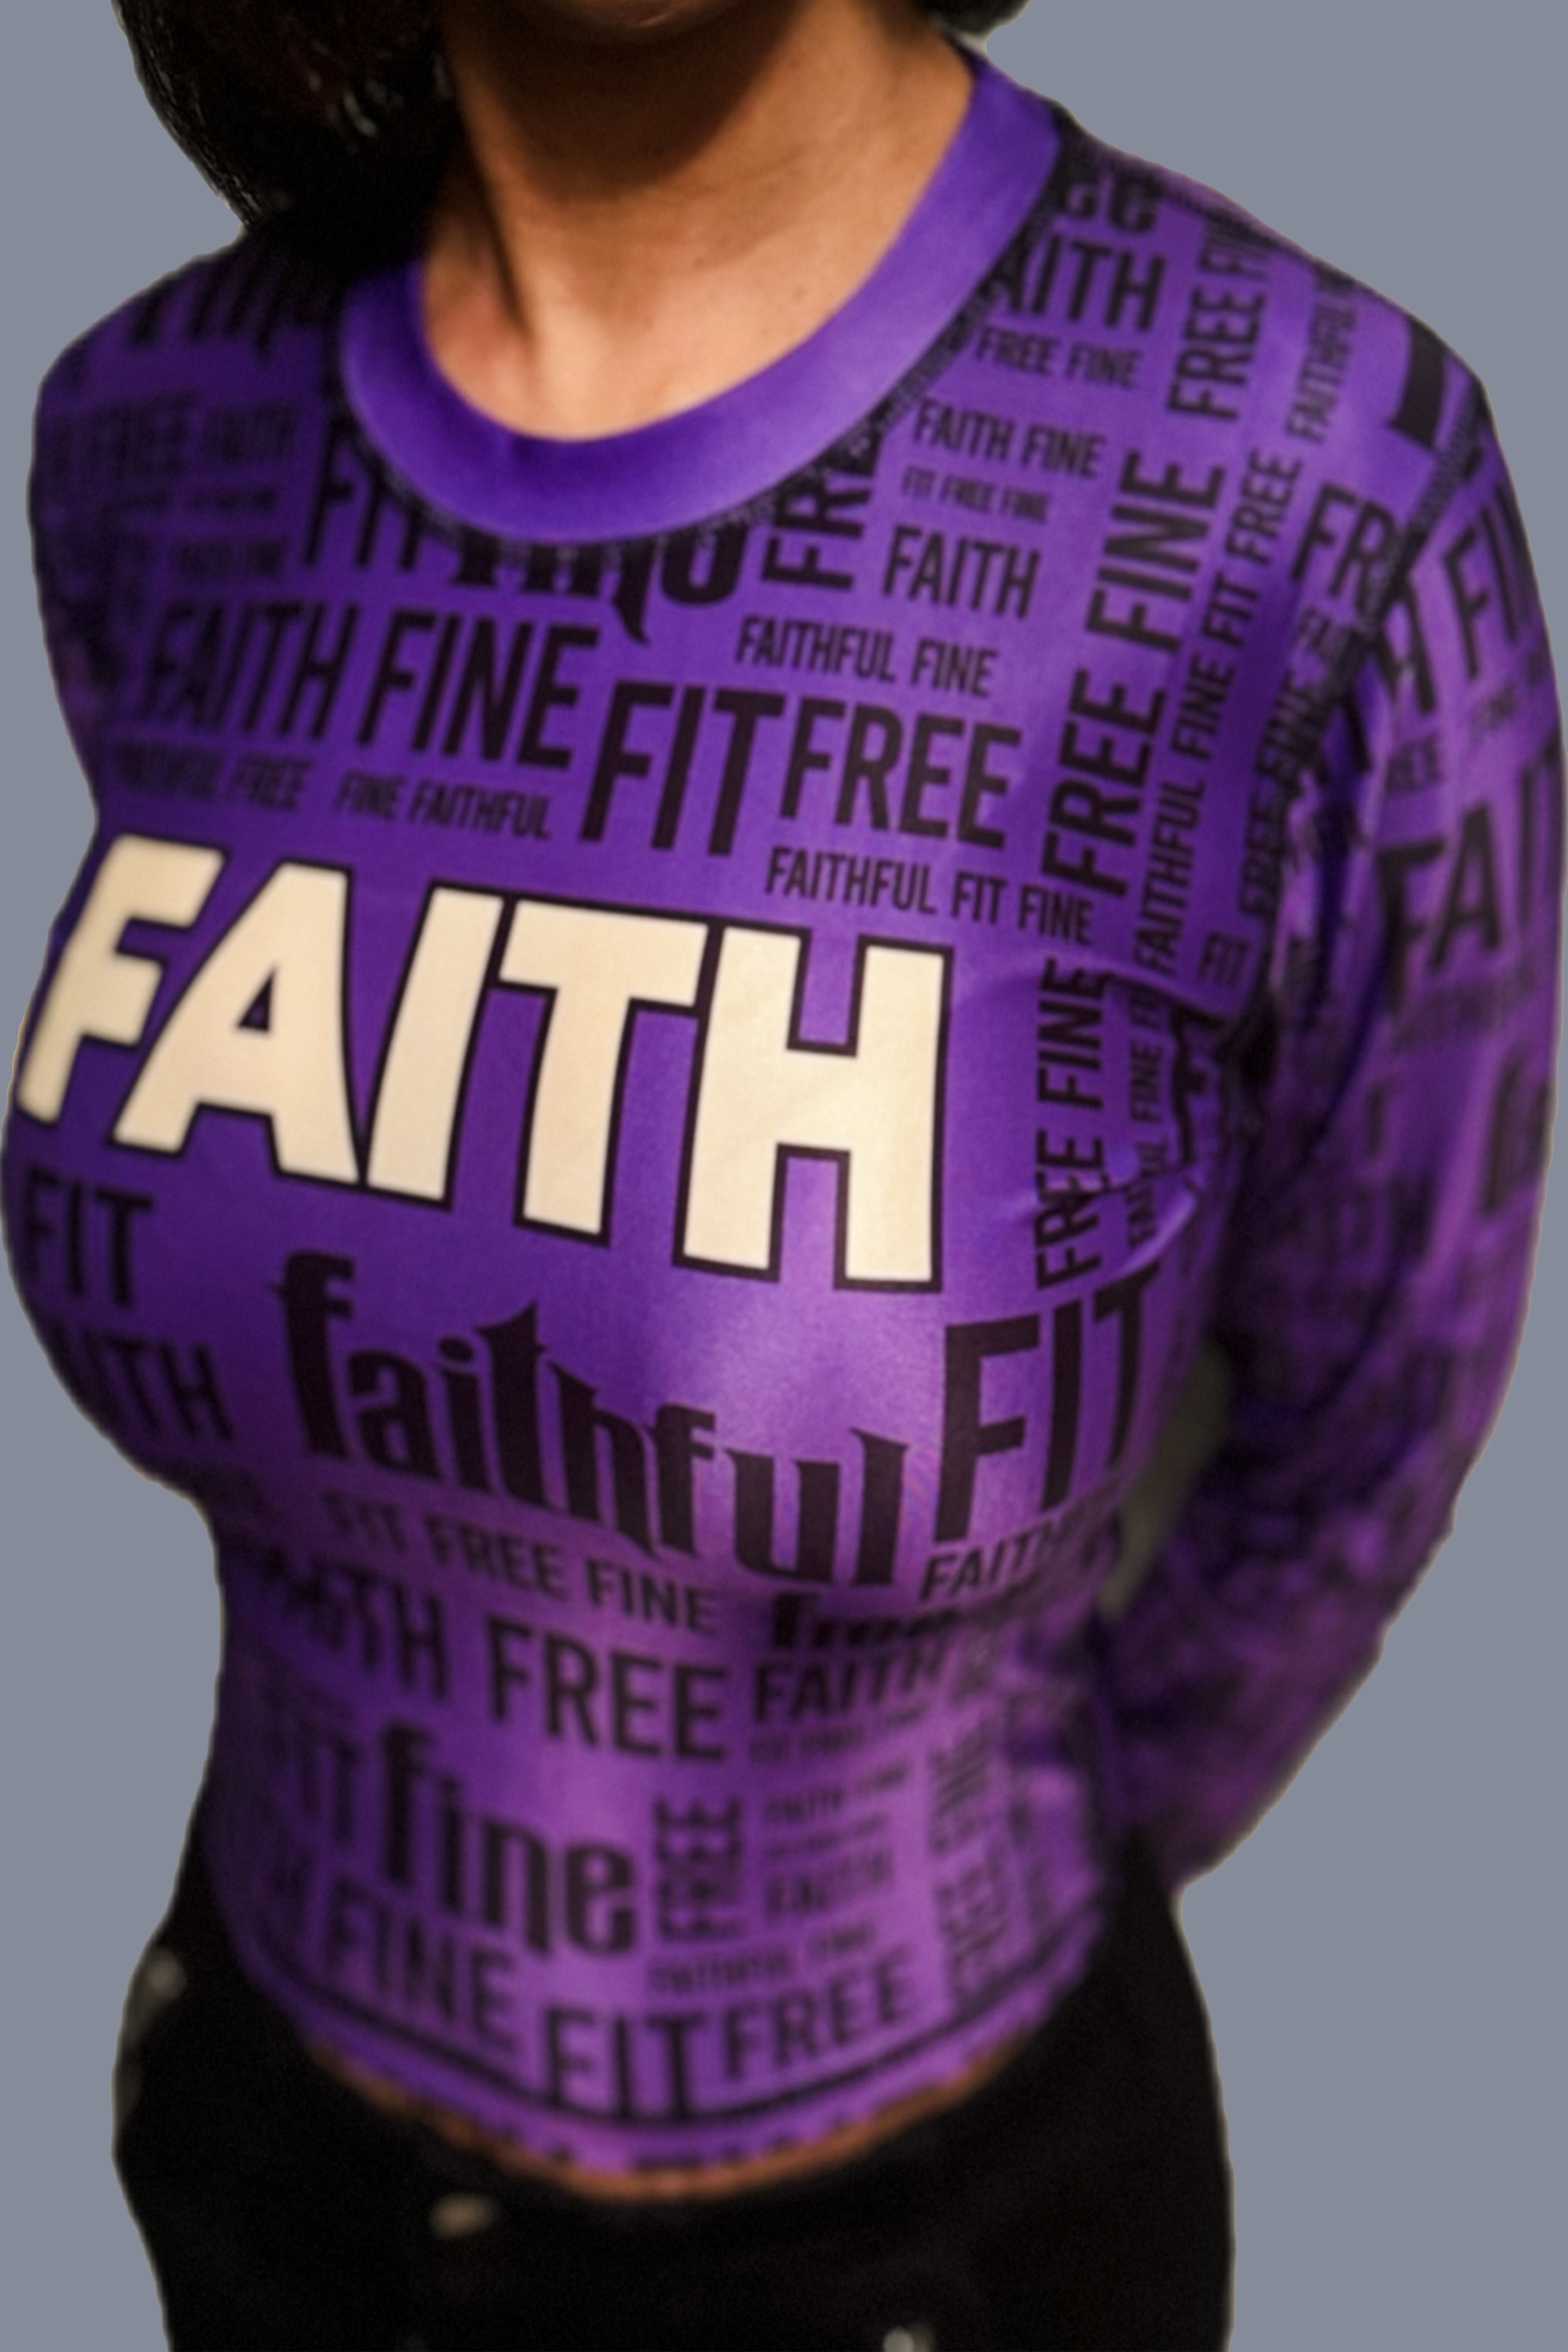 FAITHFUL FIT FINE AND FREE,